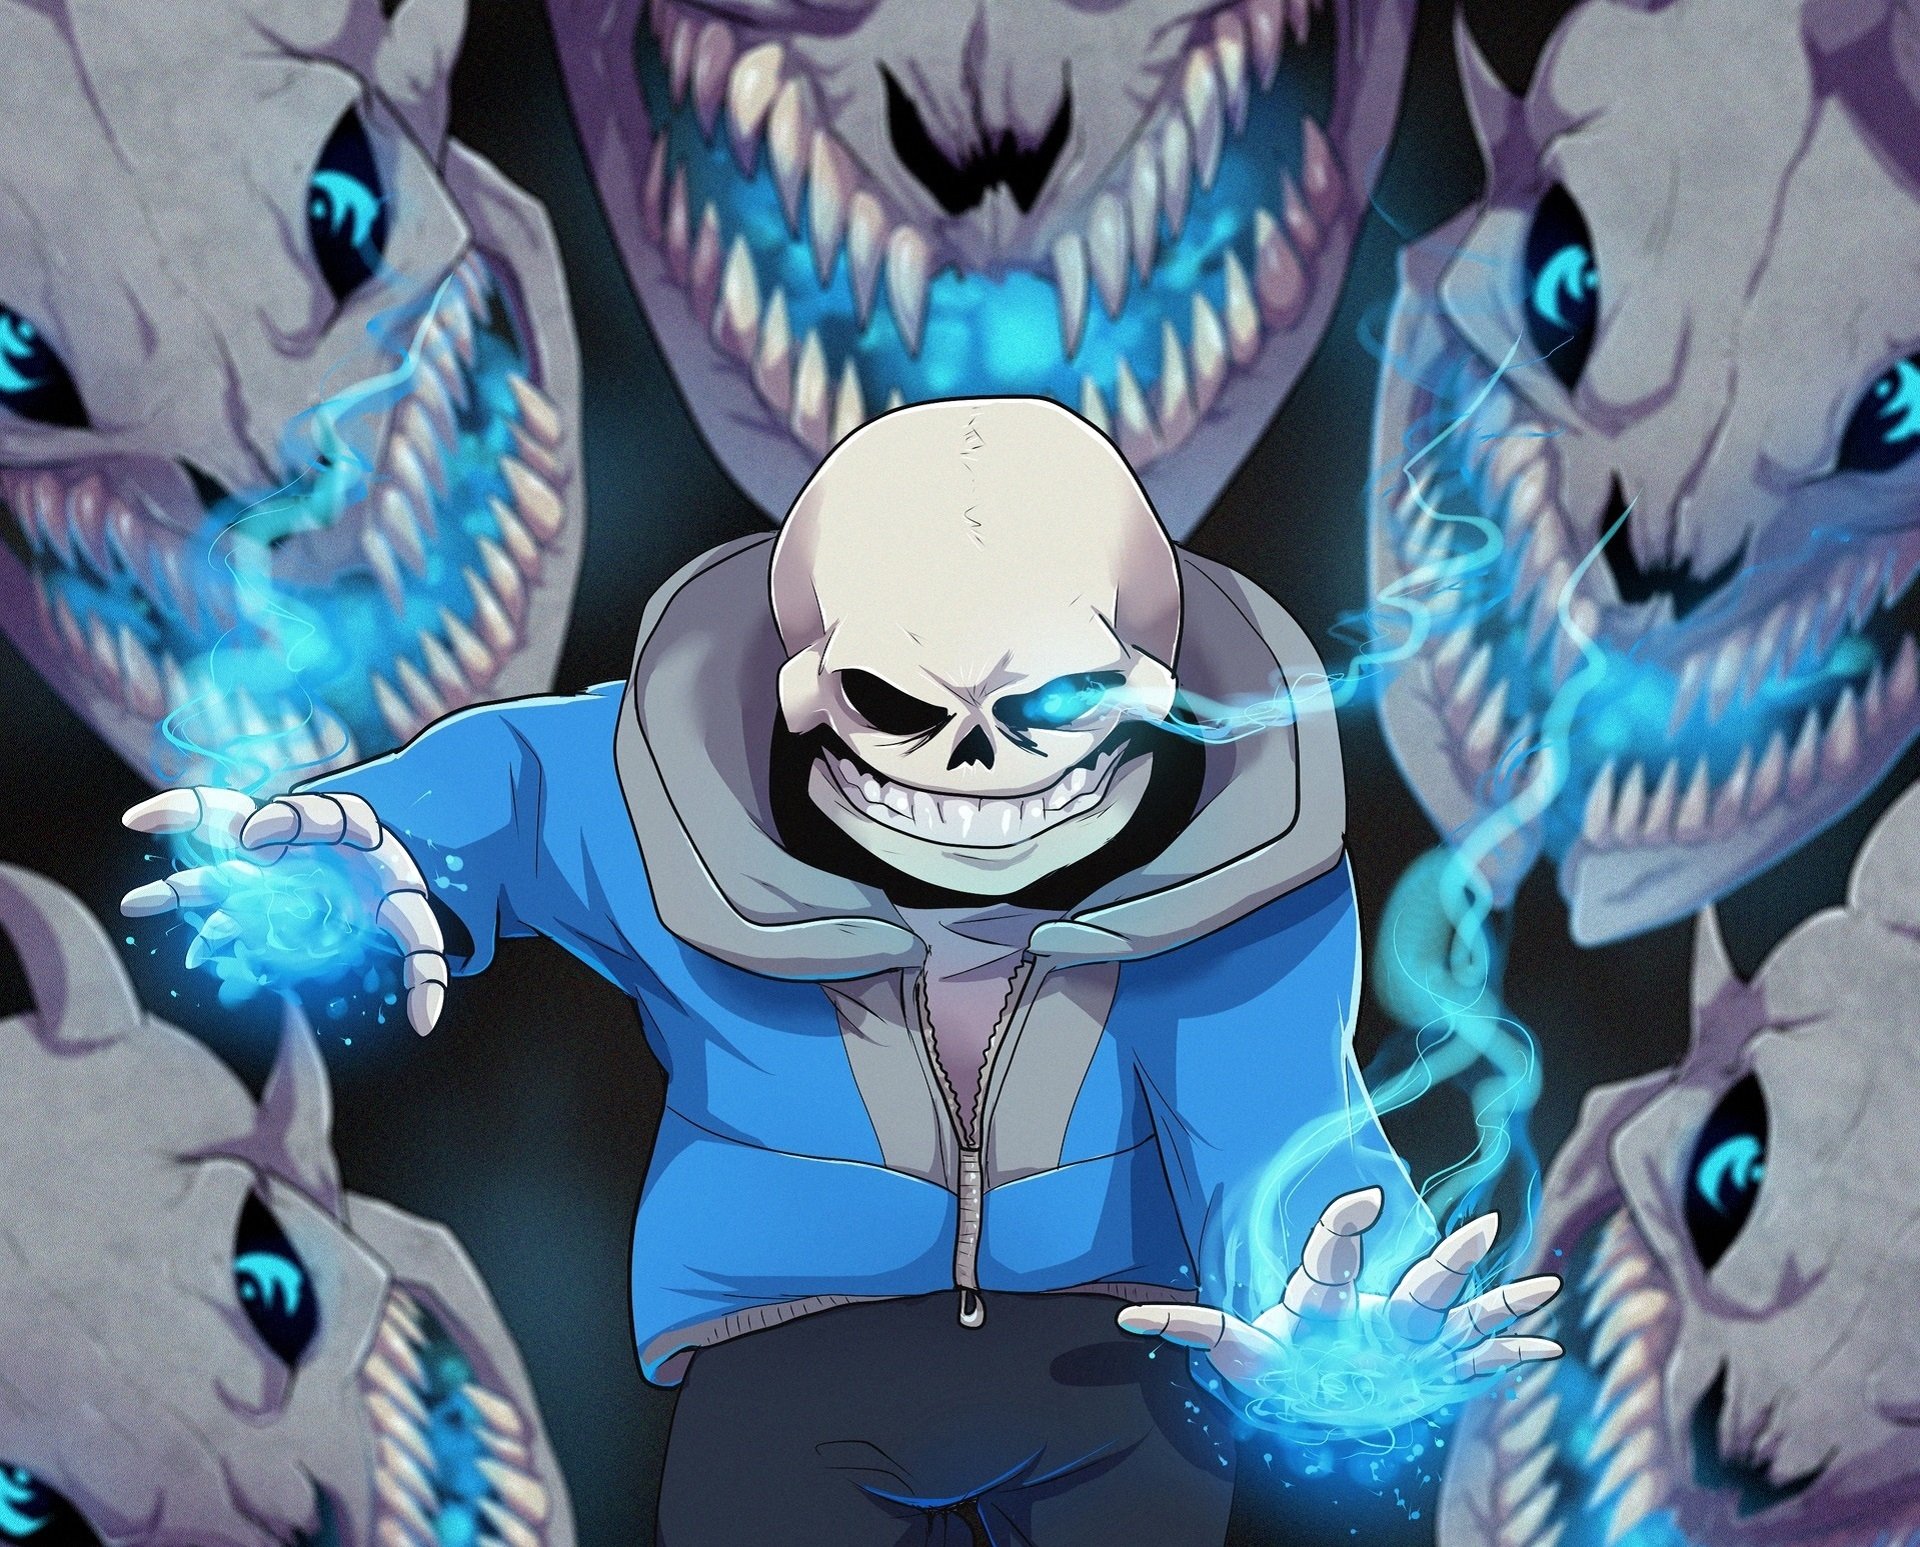 Fell sans fnf by mymelody216 on DeviantArt